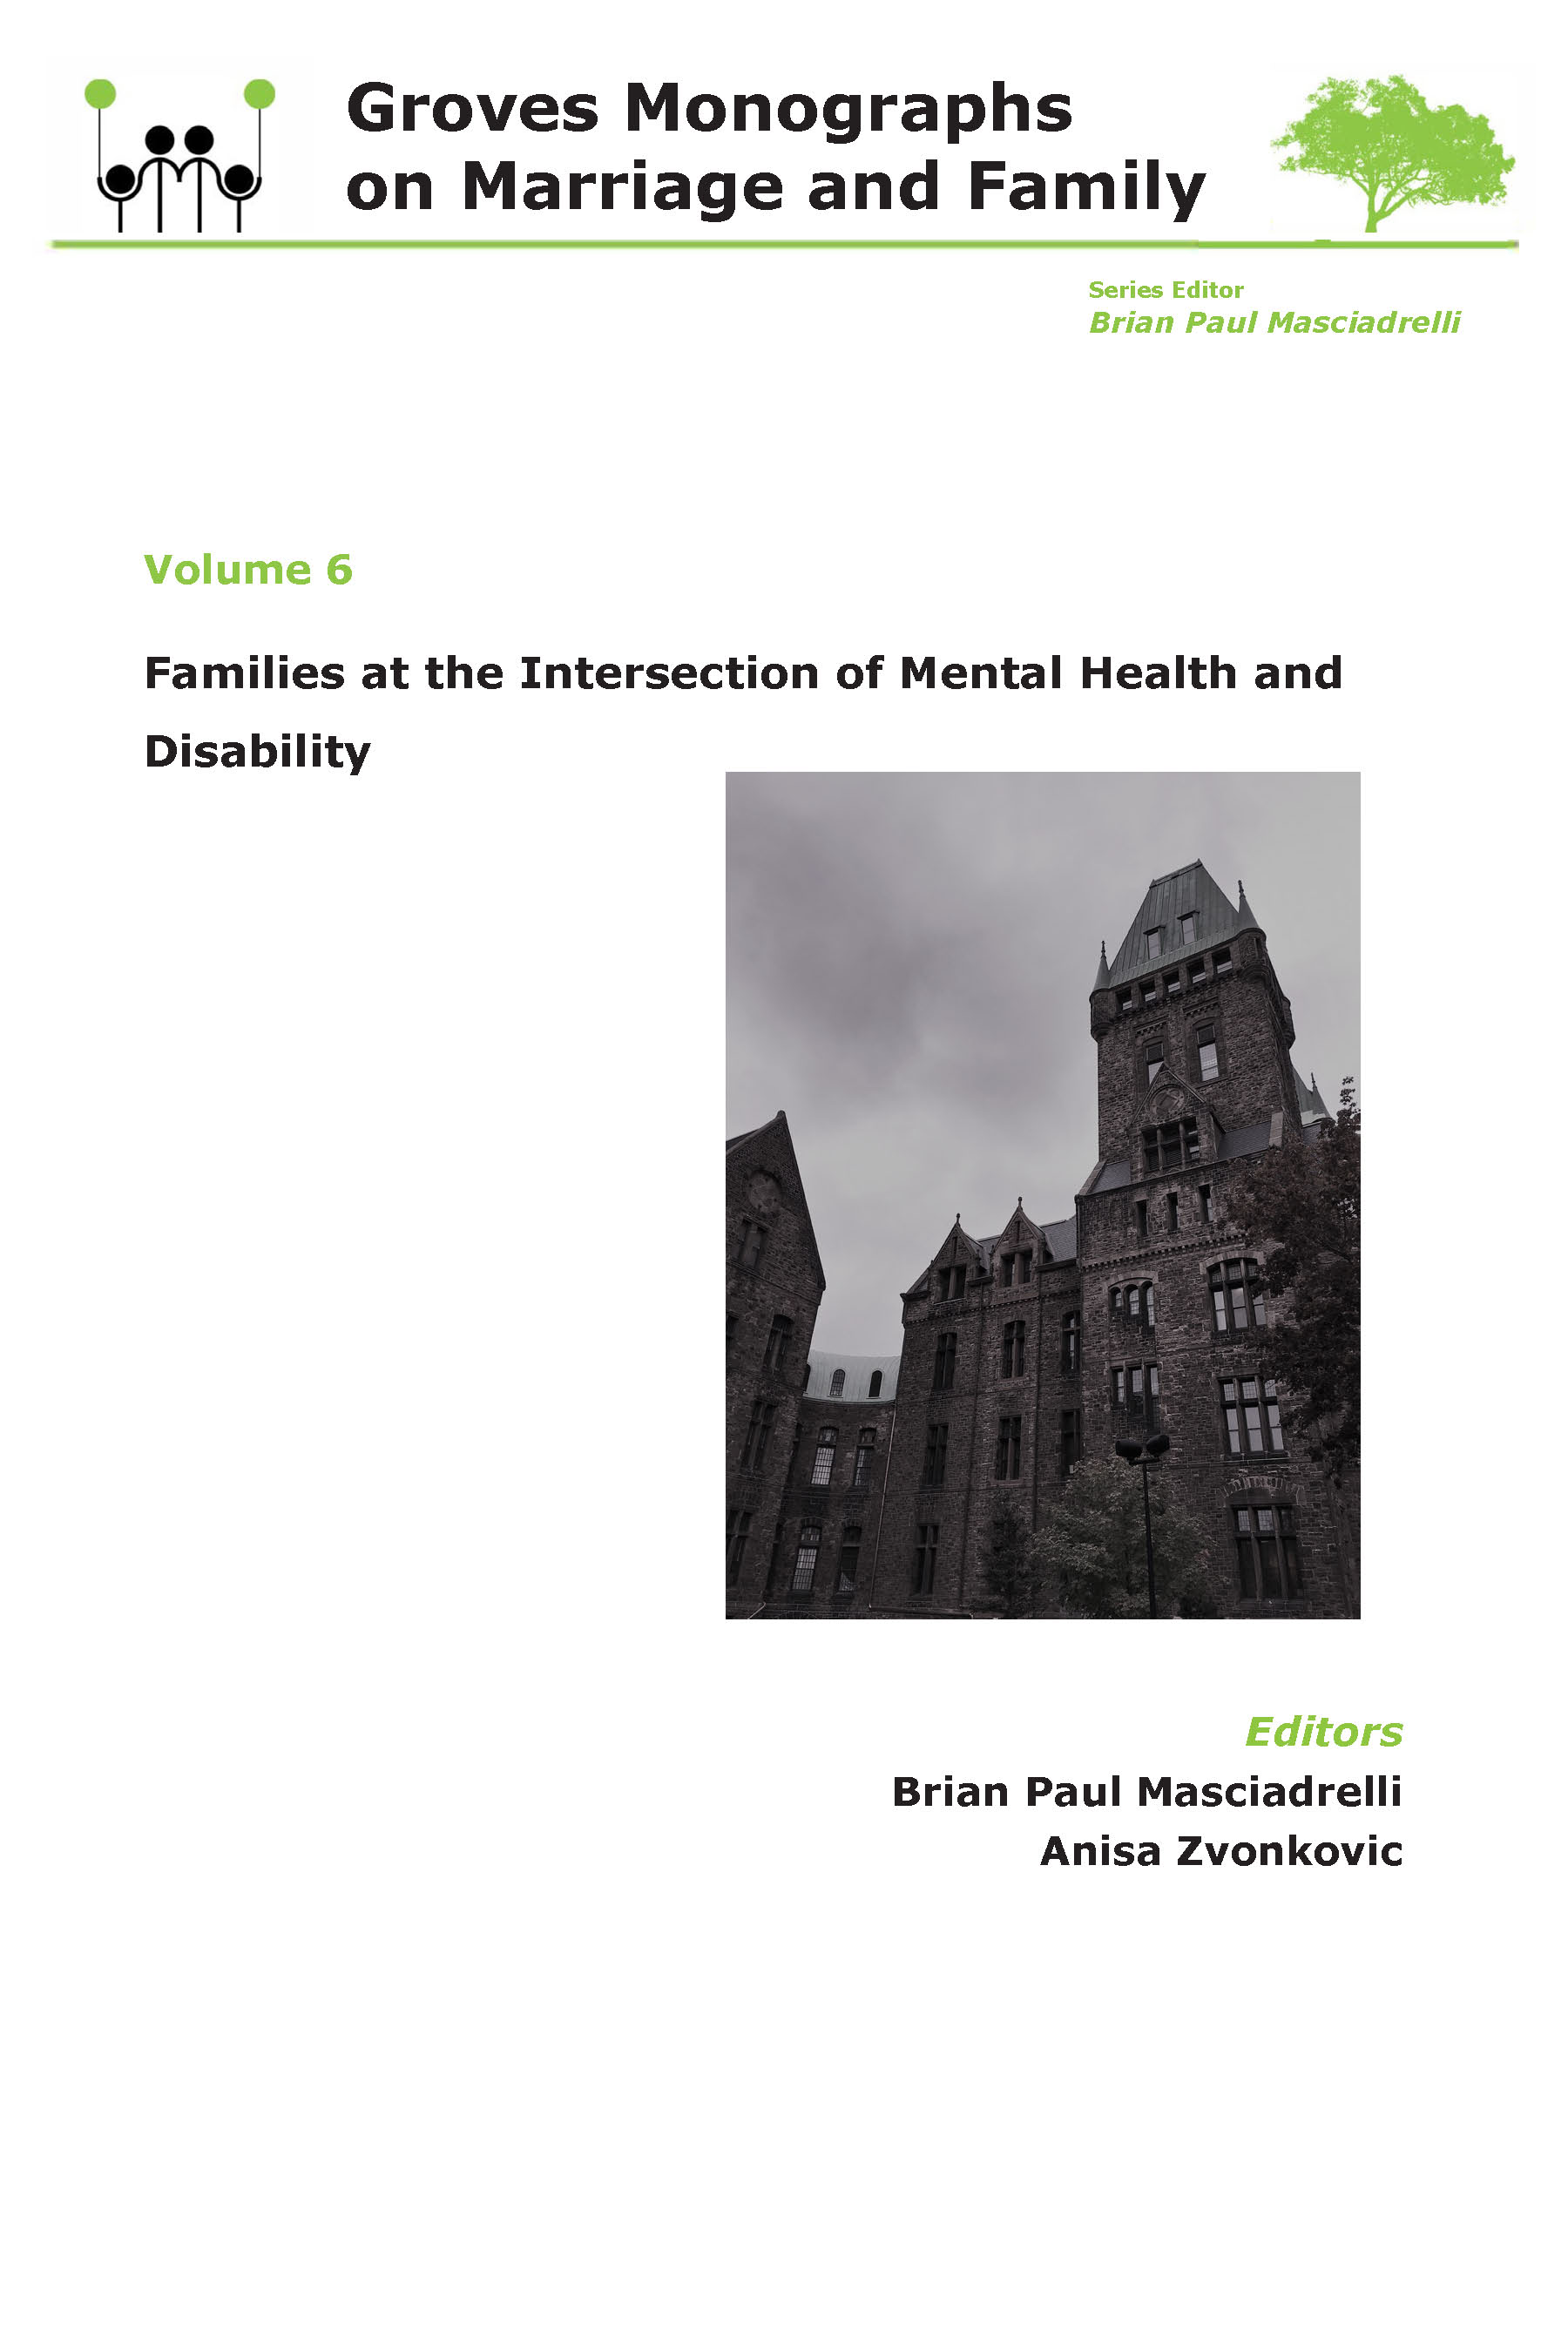 Families at the Intersection of Mental Health and Disabilities